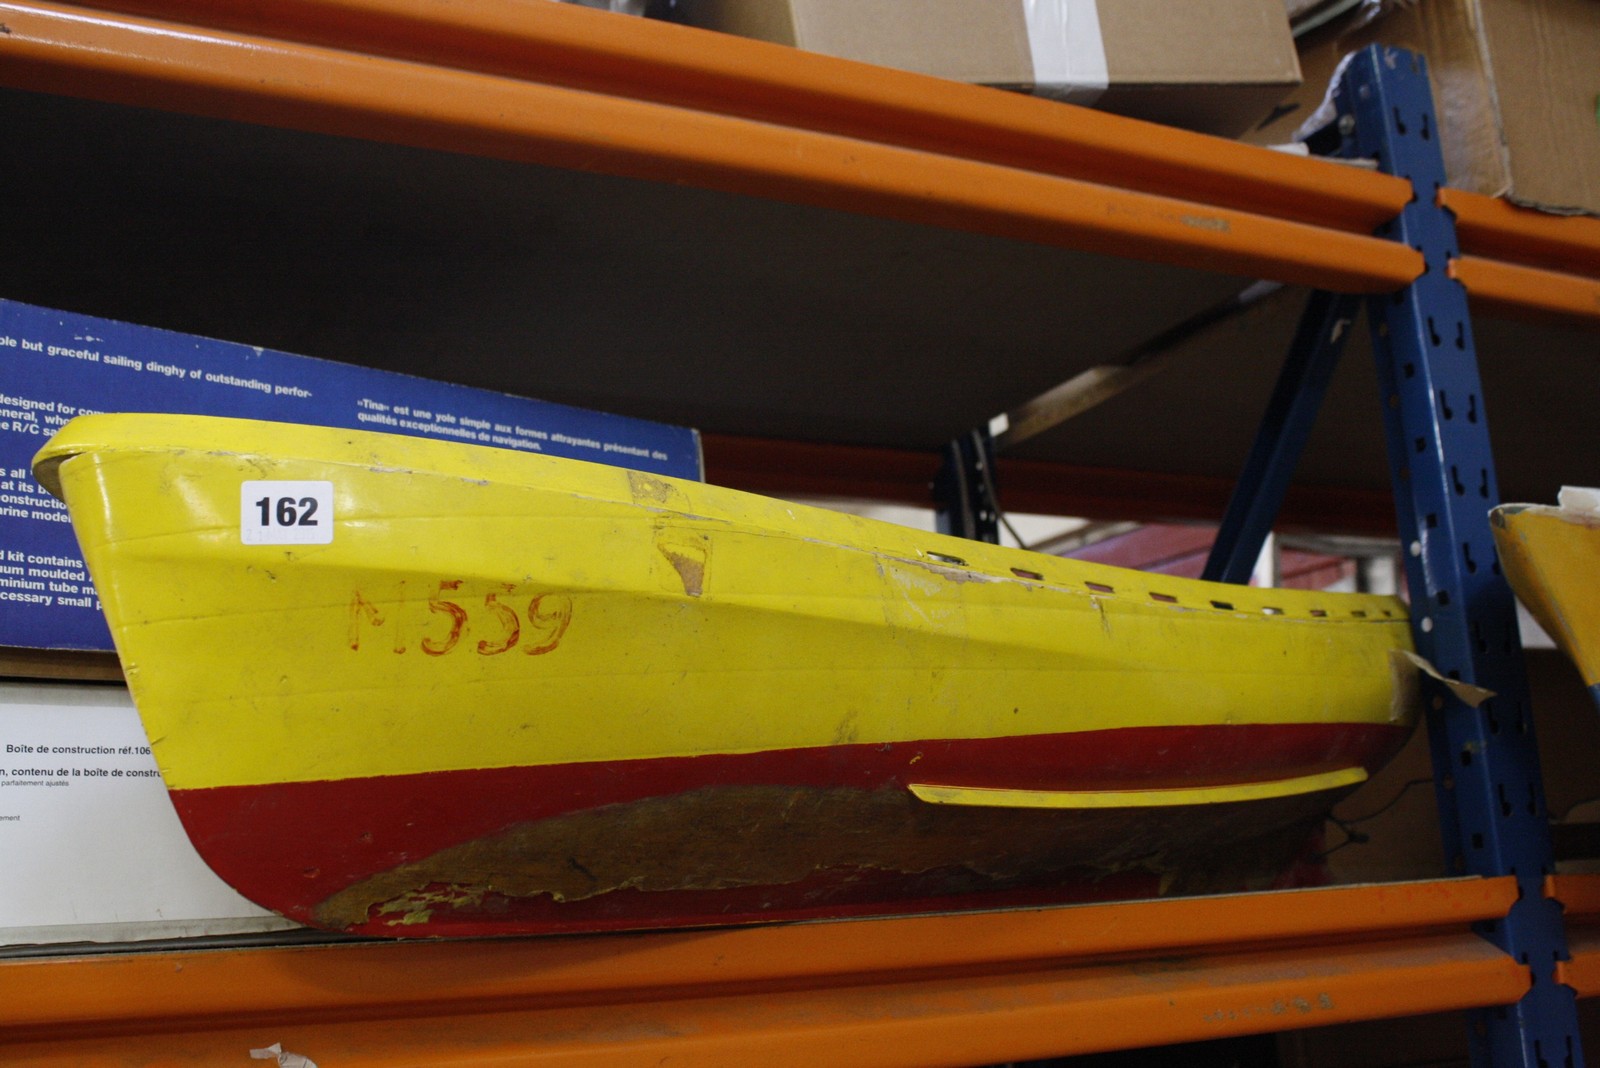 A TINA RC model sailing dinghy, boxed, a Robbe 'Jollie' model sailing dinghy, boxed, a model boat (